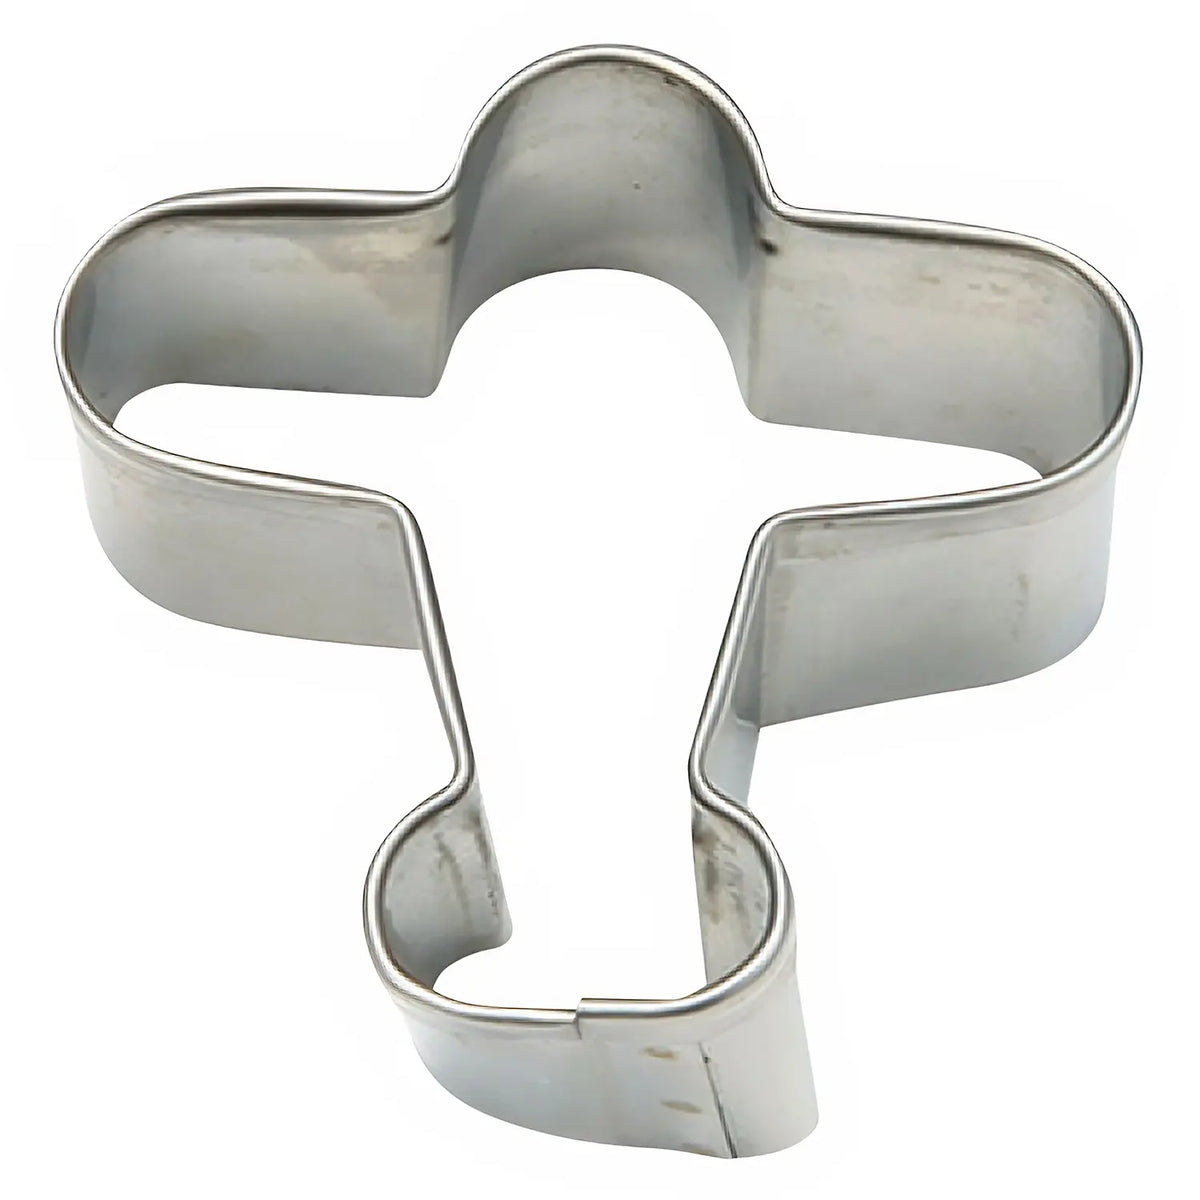 TIGERCROWN Cake Land Stainless Steel Cookie Cutter Plane